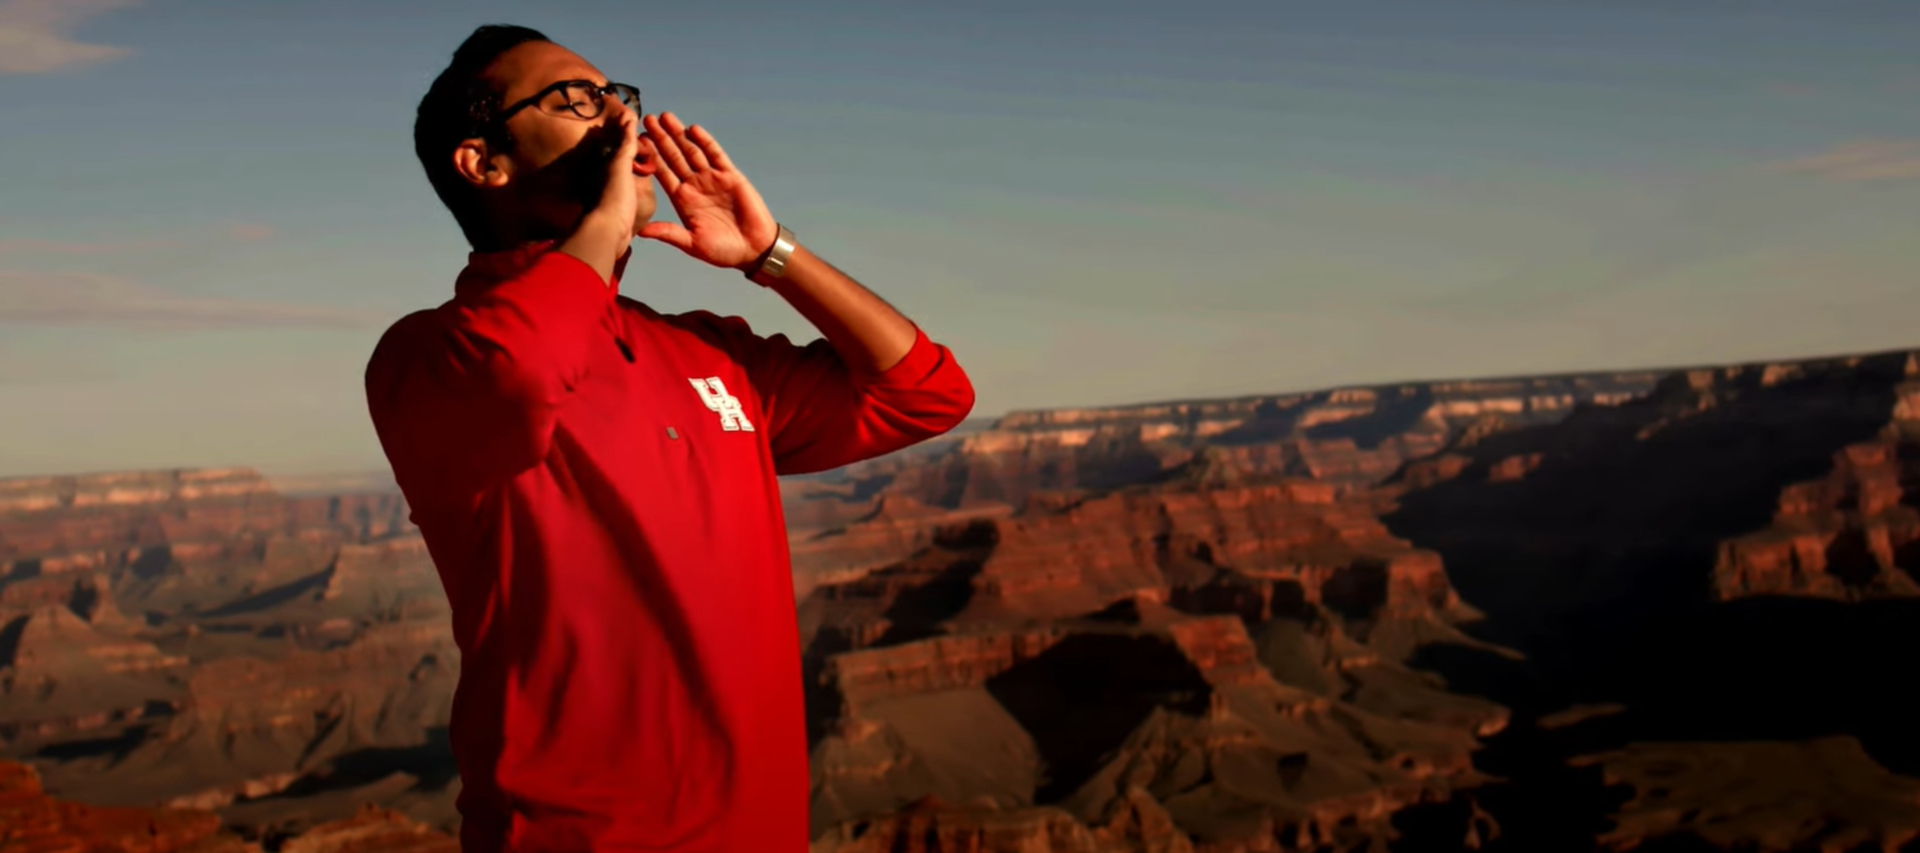 In their new 2021-2022 national commercial, UH takes the cherished chant “Whose House? Coogs' House!” to new heights.